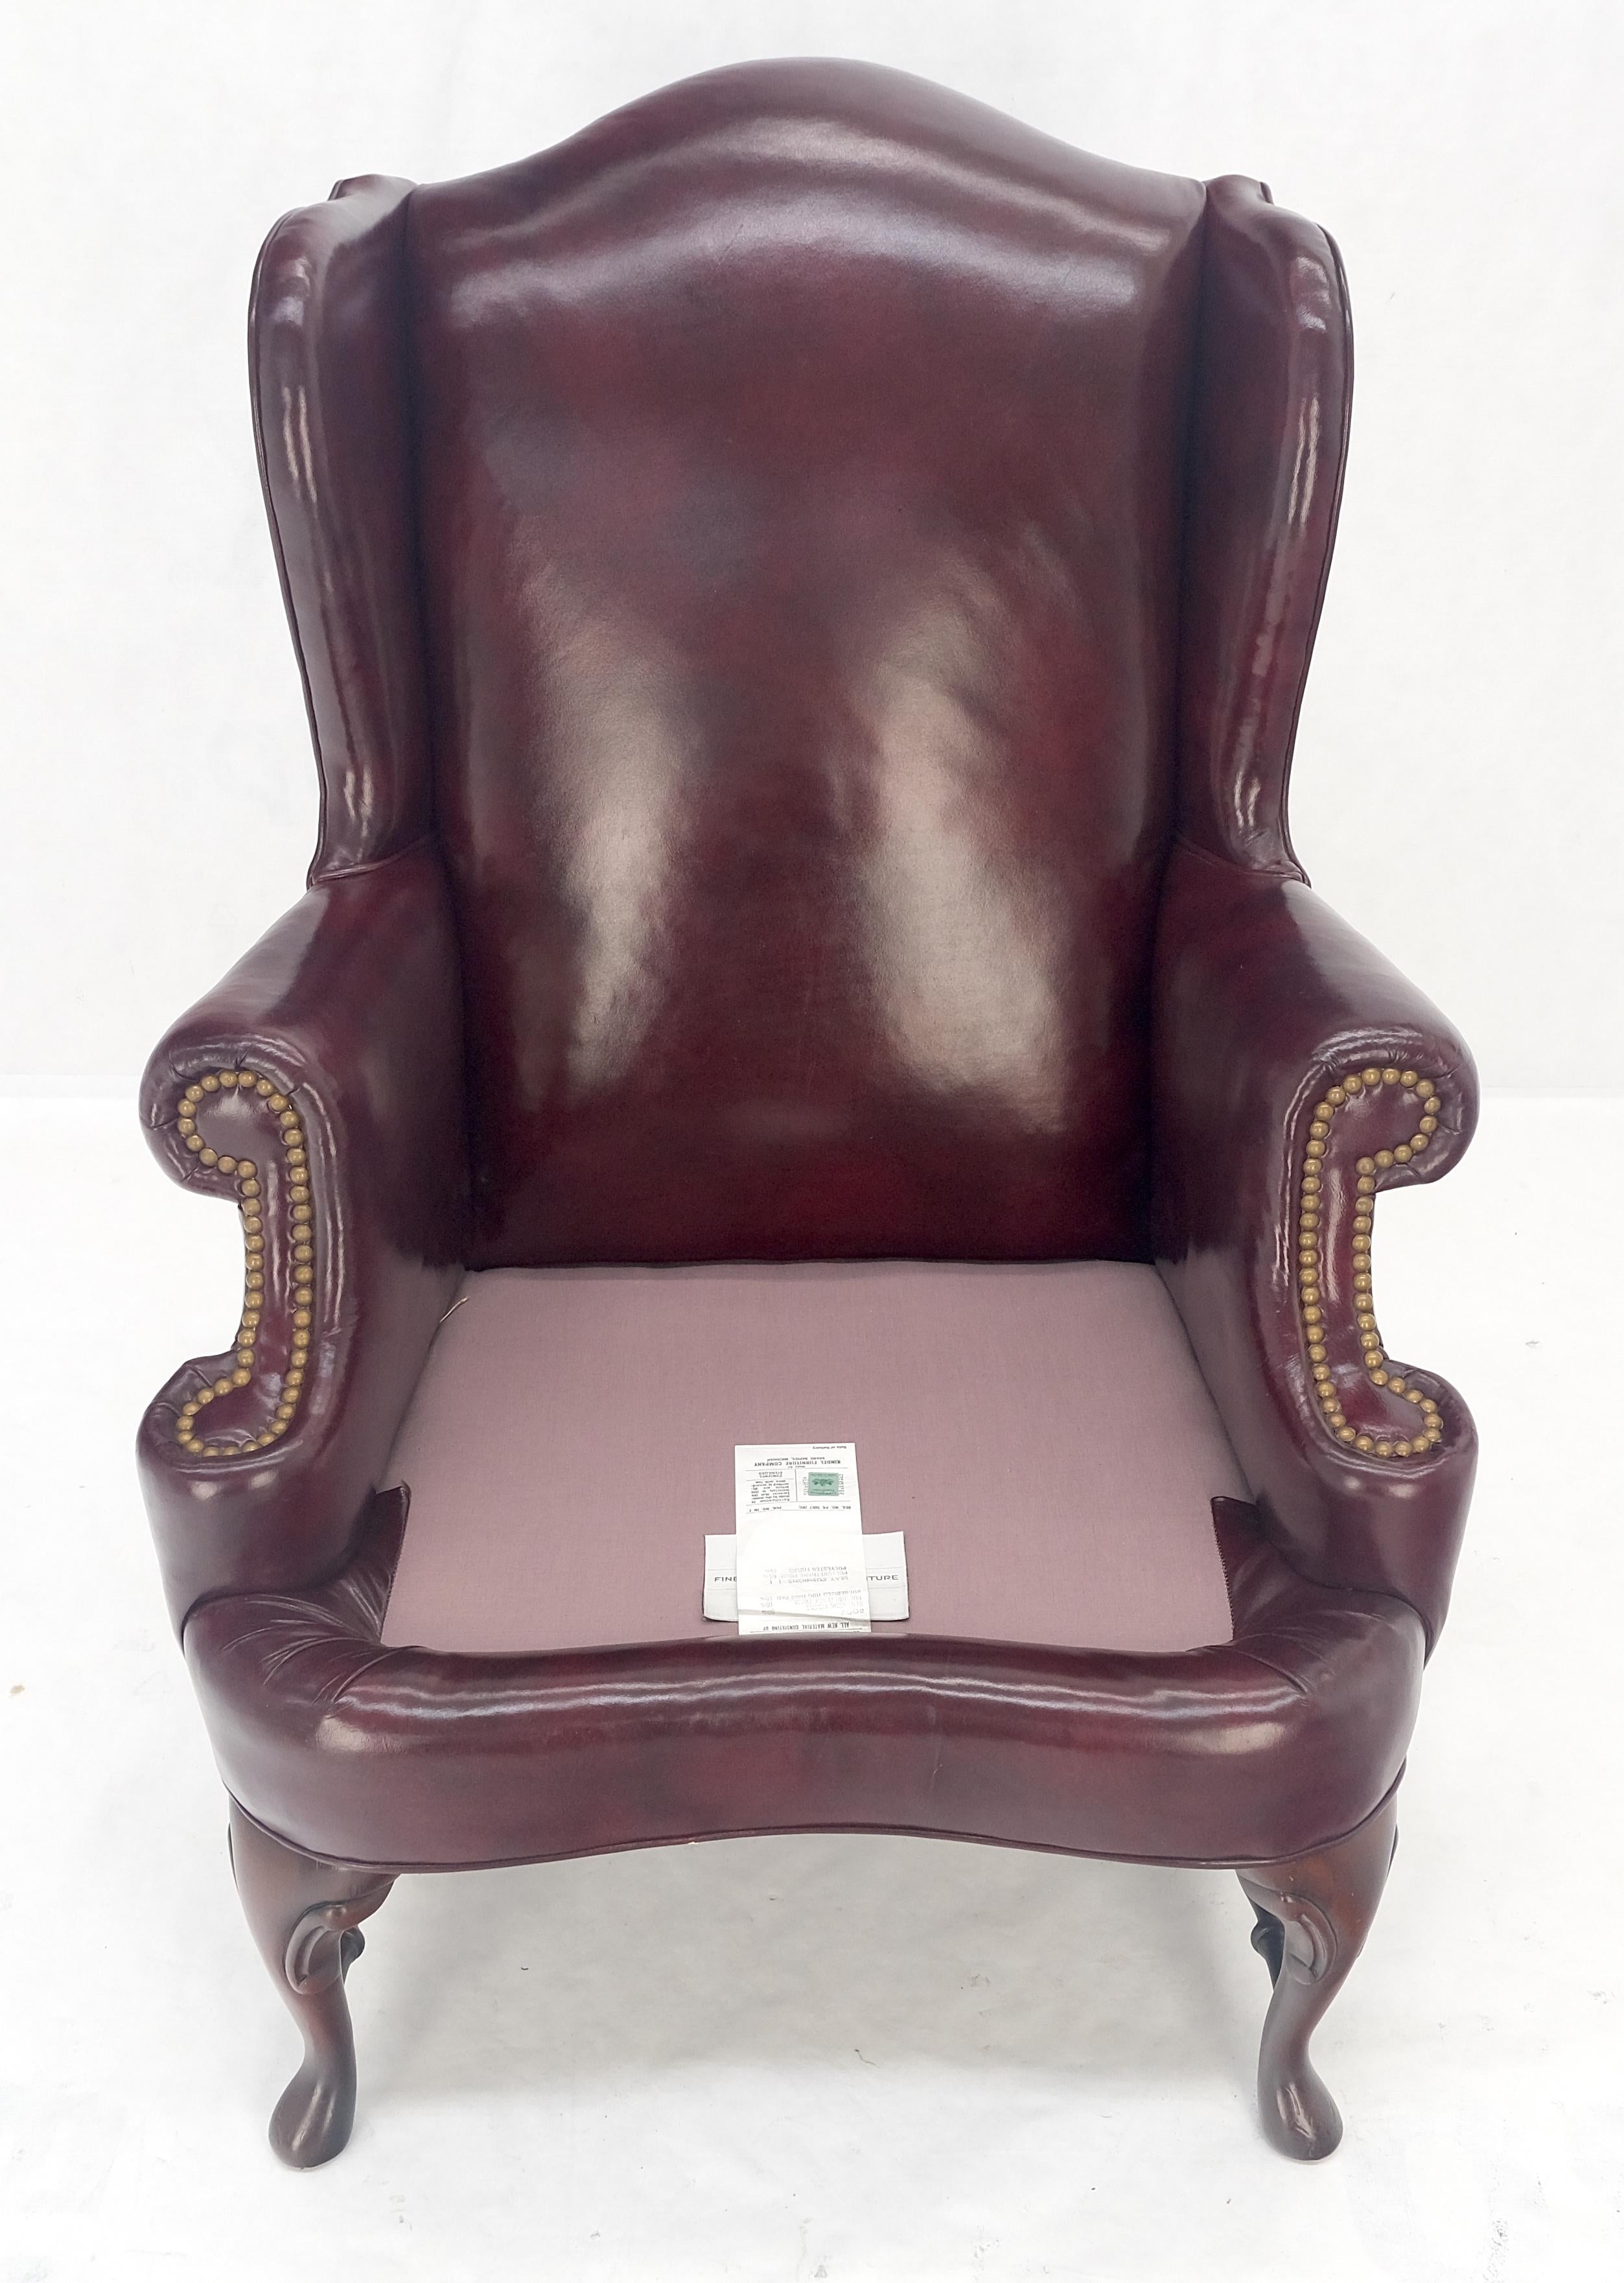 Kindel Burgundy Leather Upholstery Carved Mahogany Legs Wingback Chair & Ottoman For Sale 6